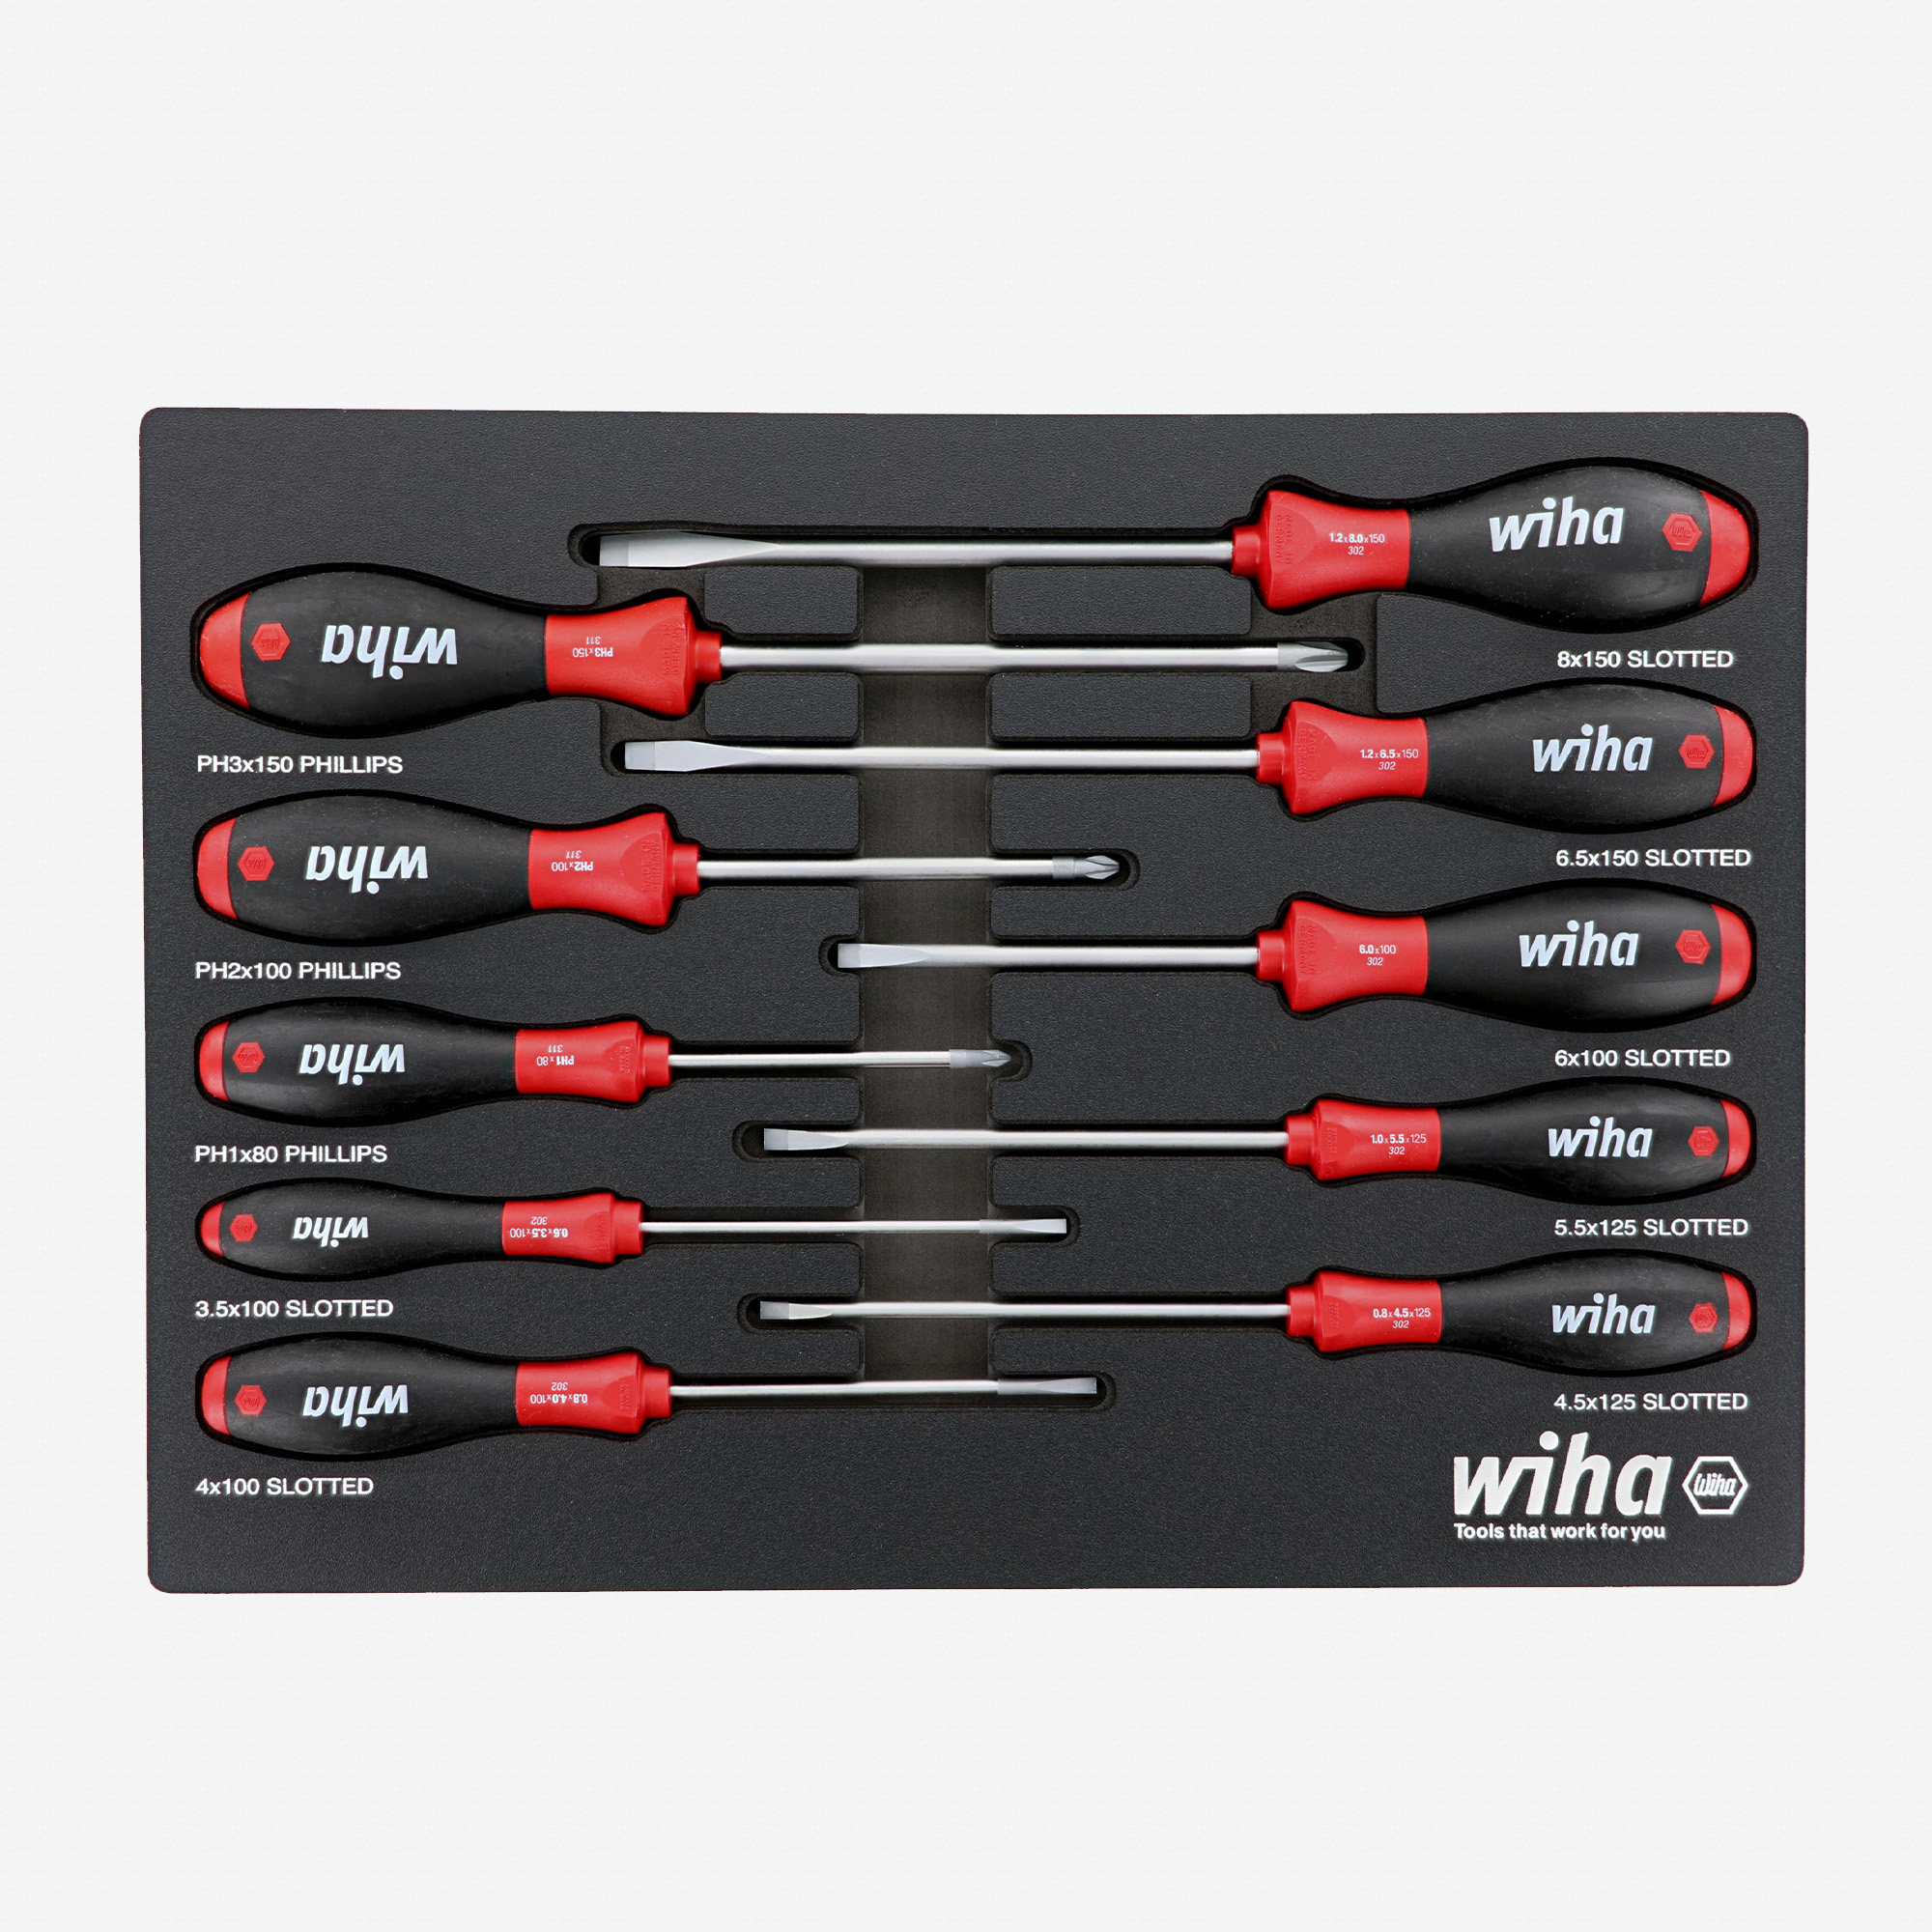 5 Piece Wiha 30295 Screwdriver Set Slotted and Phillips